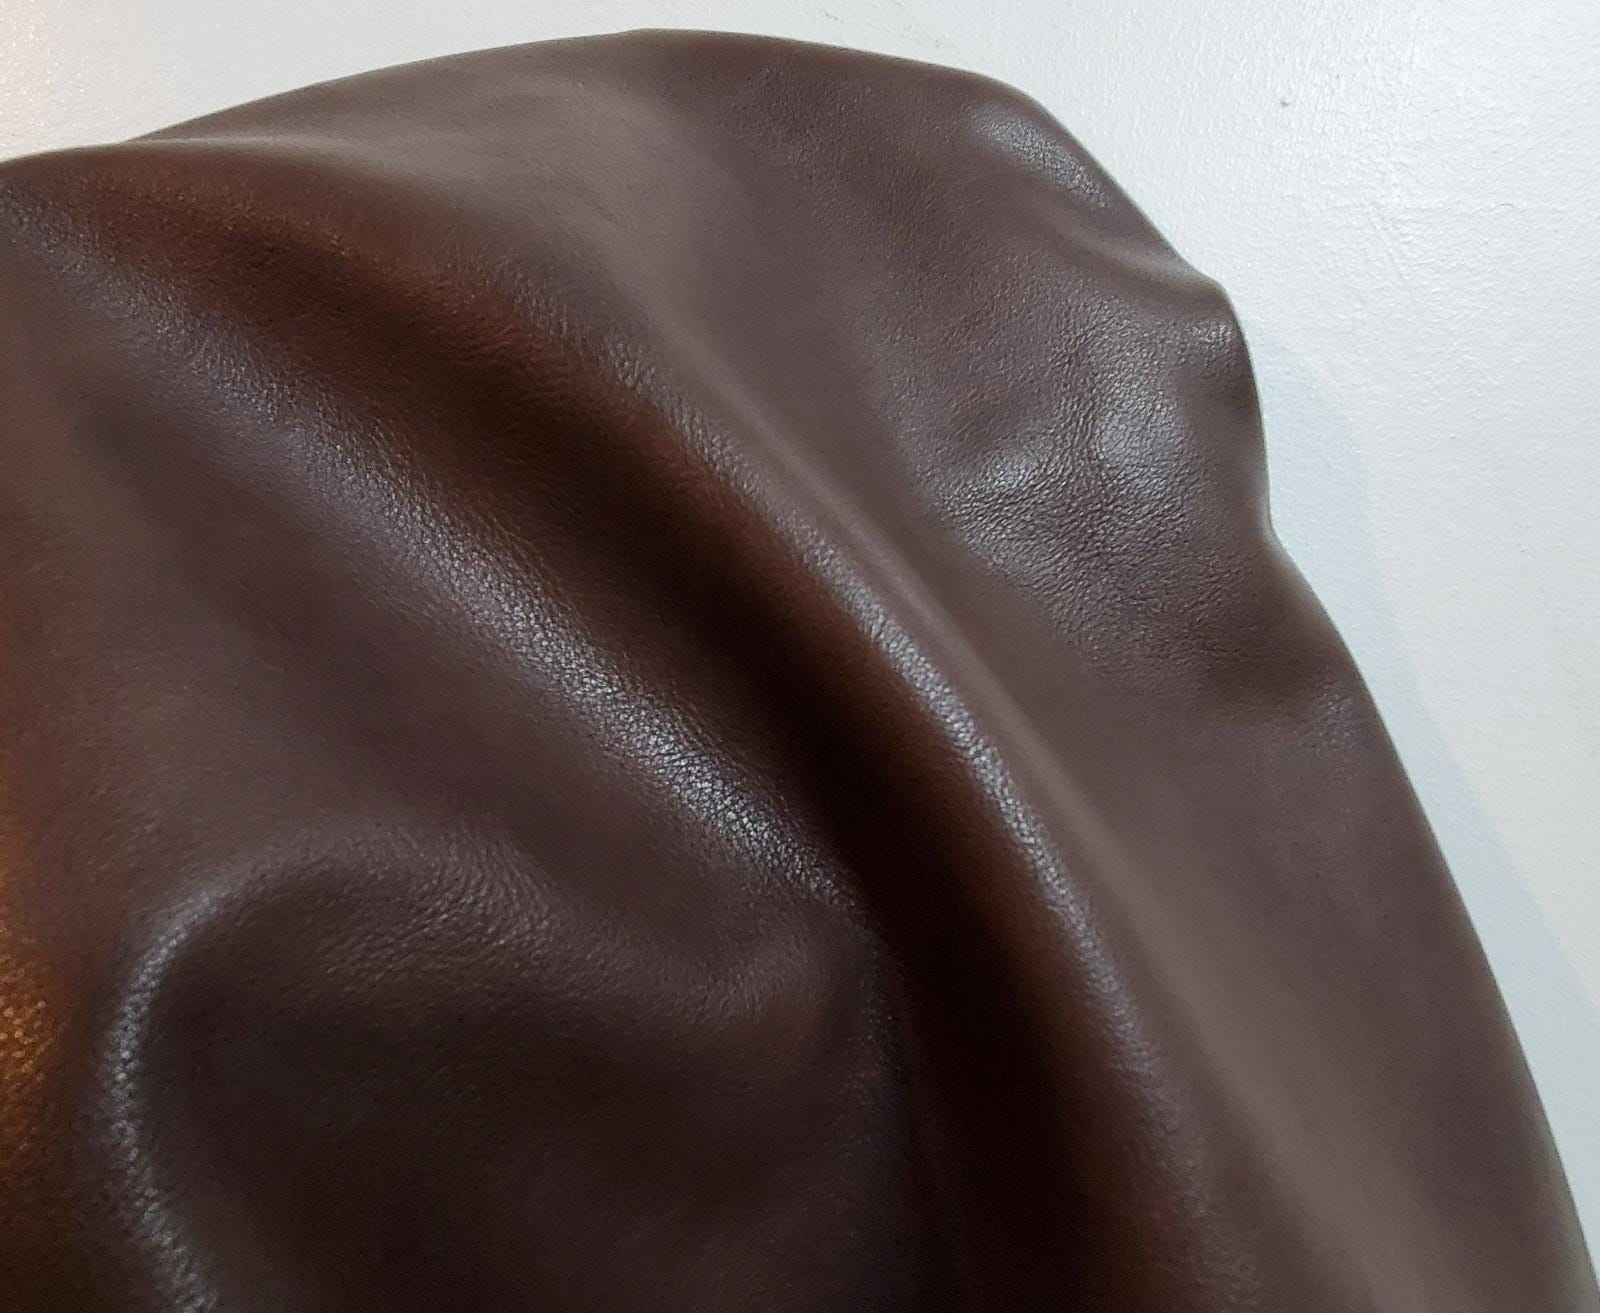 Brown 2 tone pebblegrain Faux Vegan Leather  Faux vegan leather by the yard sheets distressed leather fabric for upholstery 30,000 Double Rubs vinyl sheets nappa leather crafts bookbinding books furniture fabrics uphilstery fuax material pu pleather faiux learher cruelty free nappa seat dark